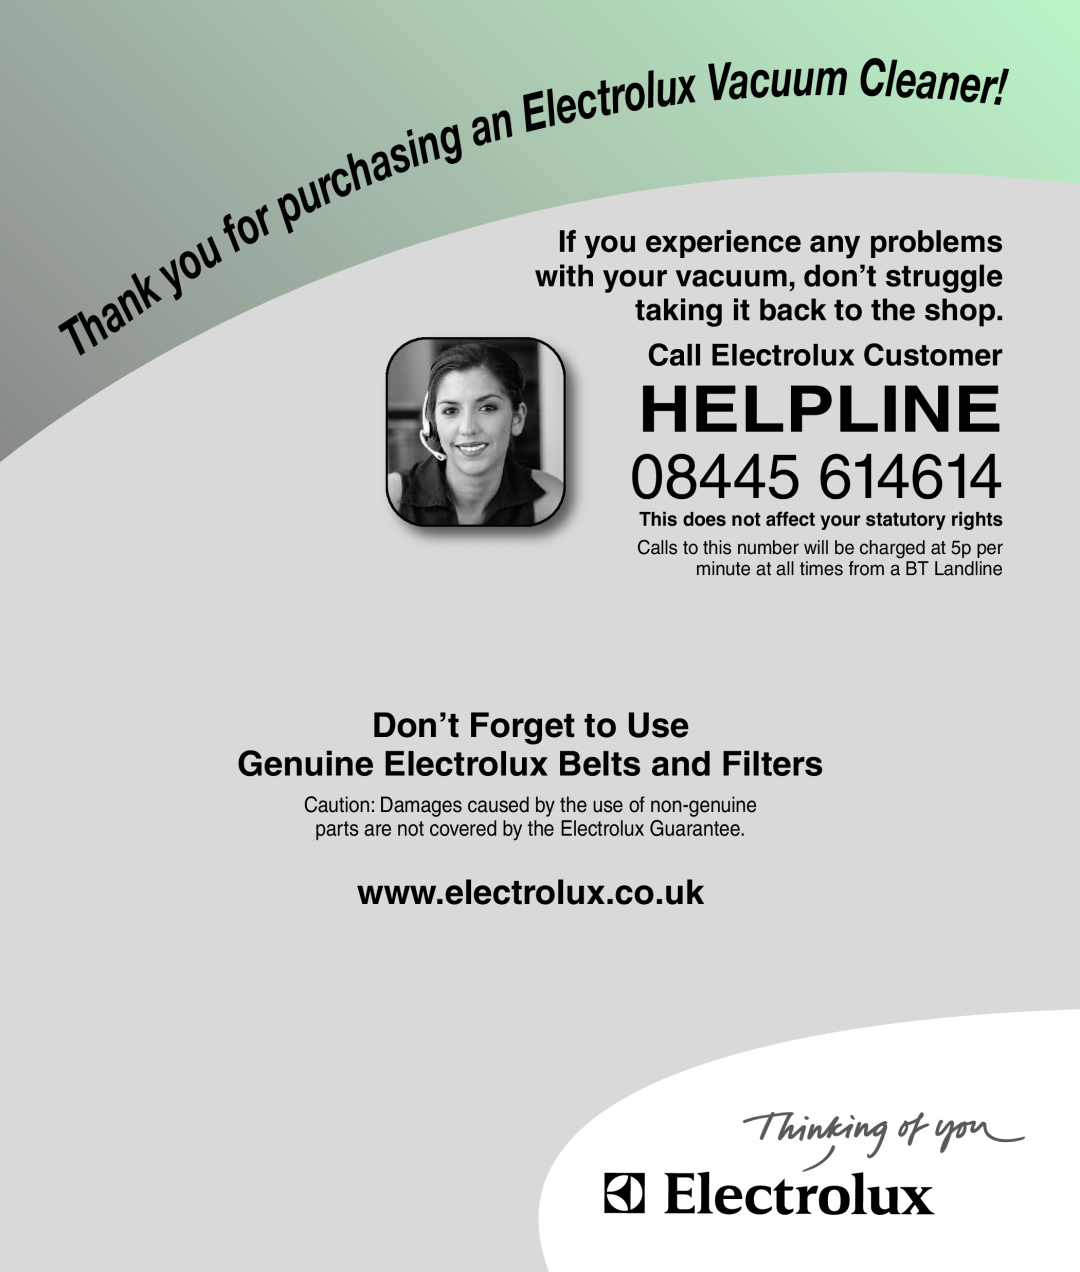 Electrolux Z3040 Series manual Helpline, 08445, uum Cl, Don’t Forget to Use Genuine Electrolux Belts and Filters 